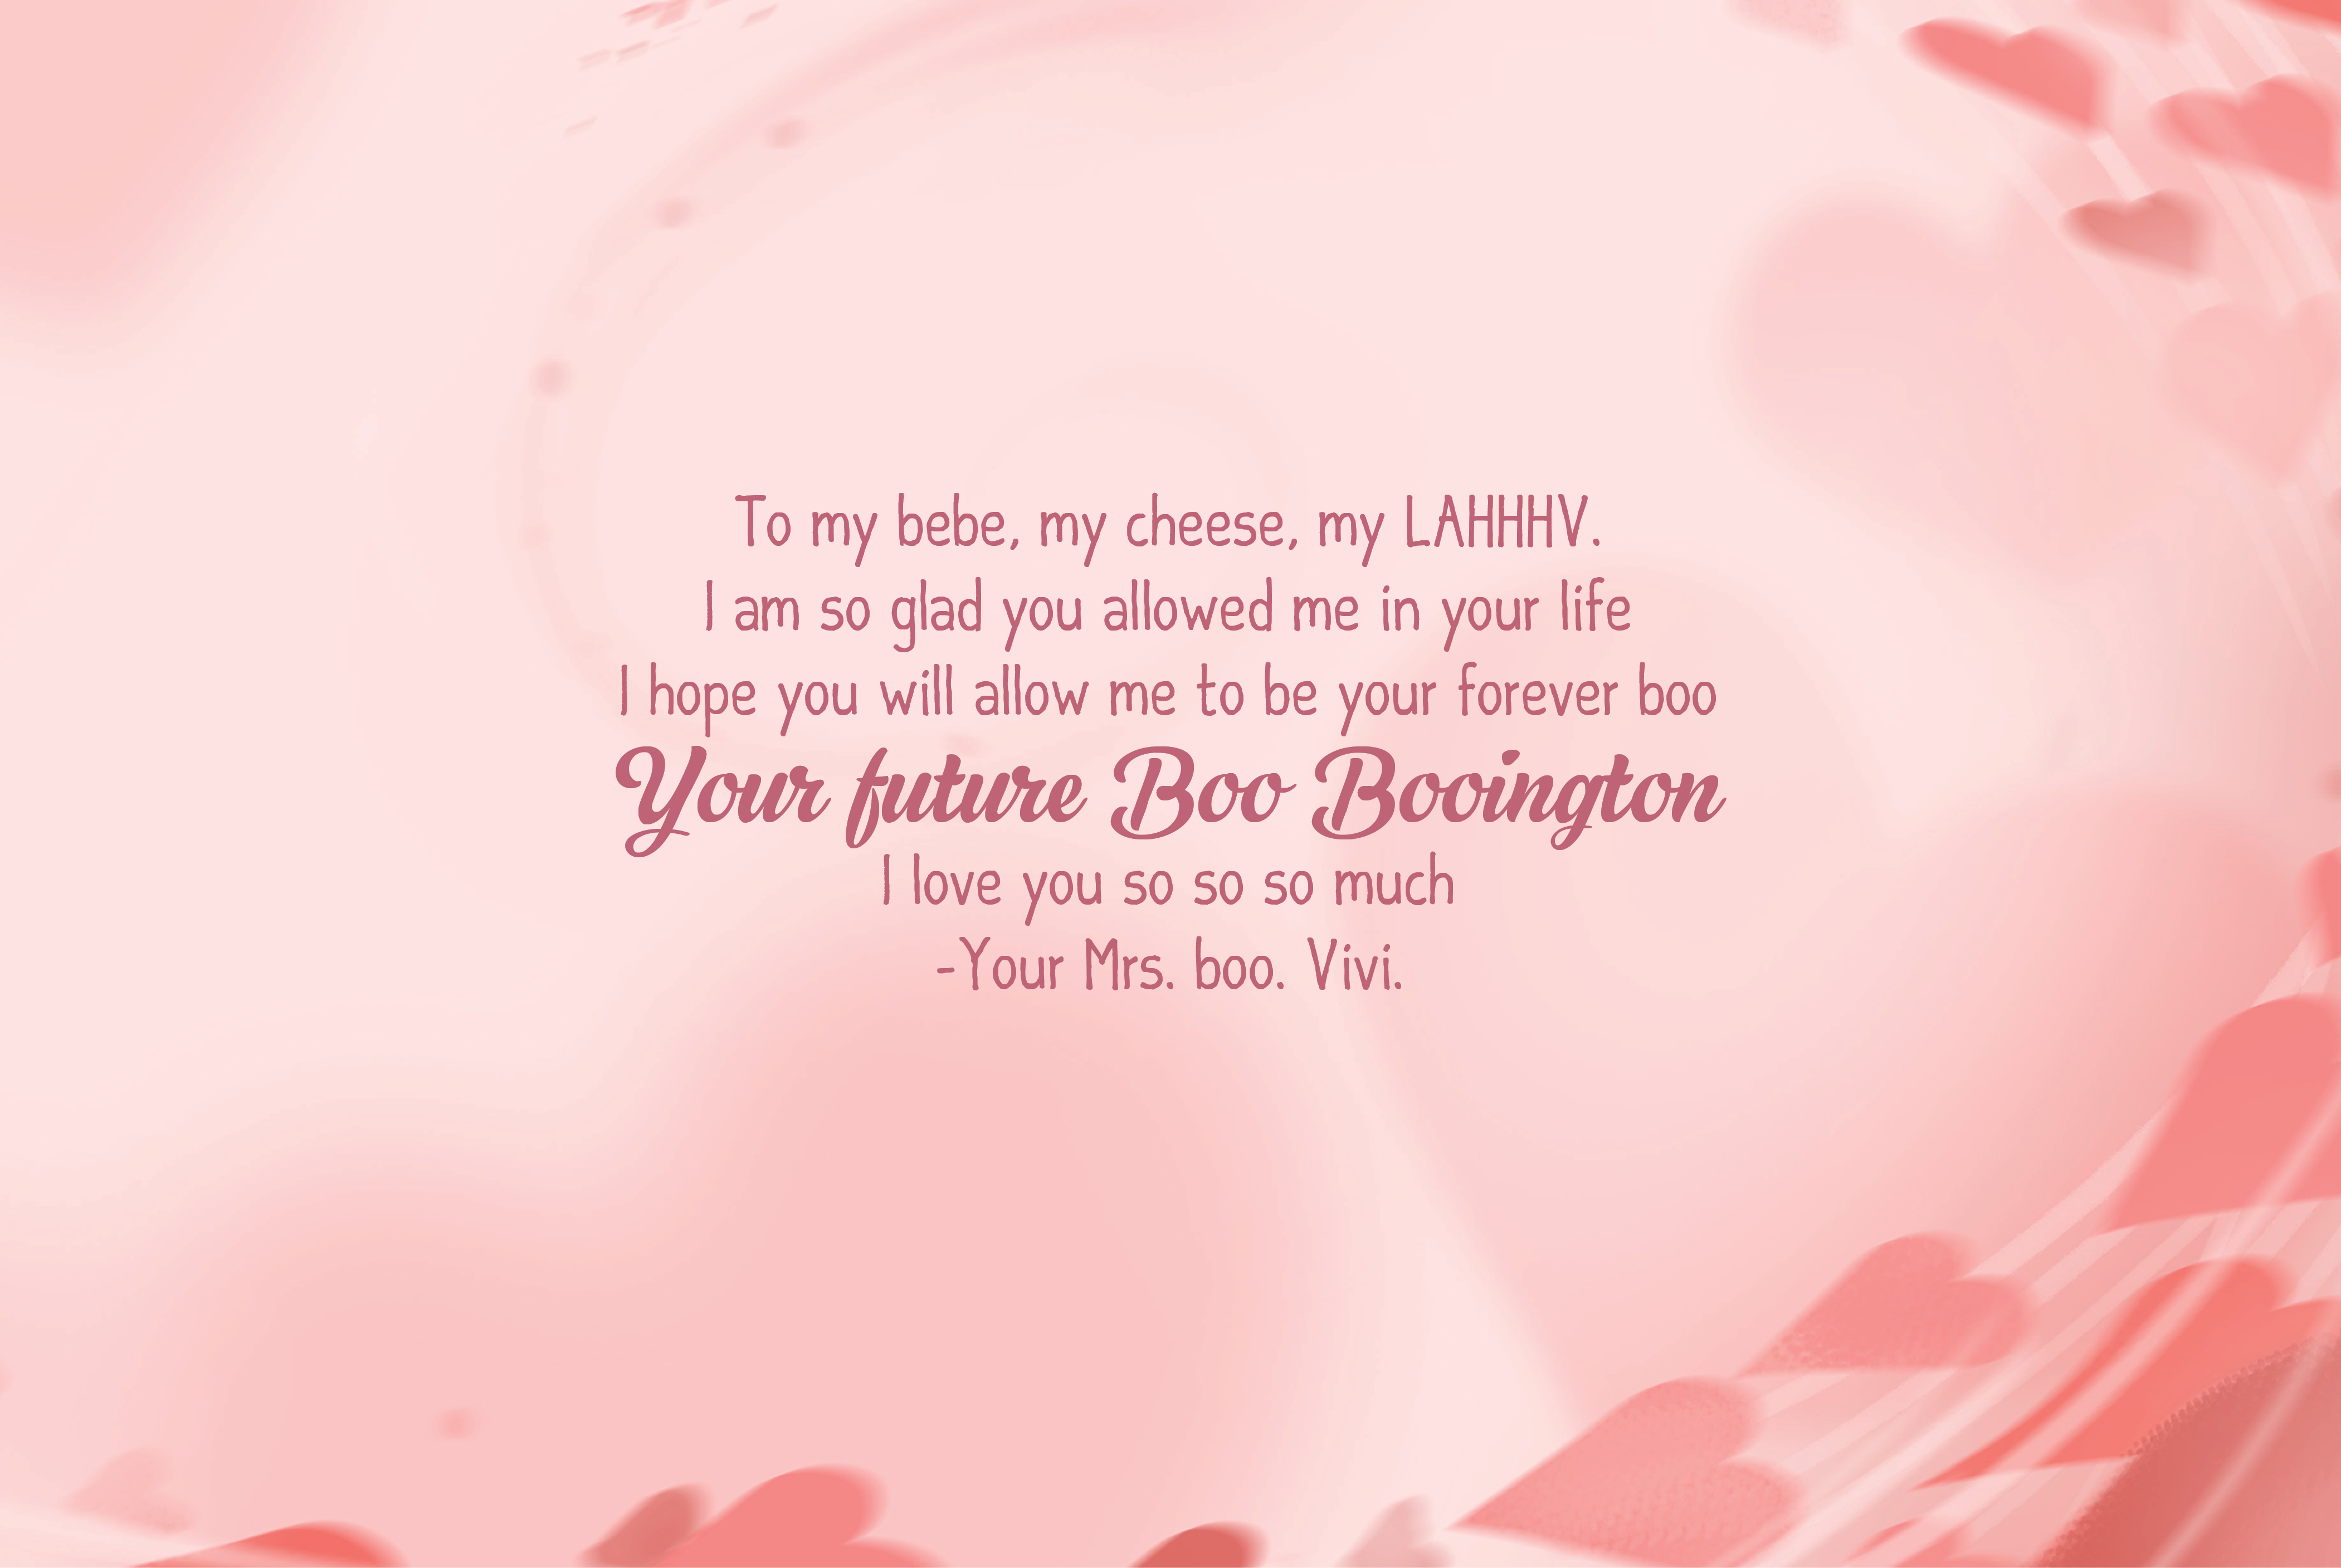 To my bebe, my cheese, my LAHHHV. I am so glad you allowed me in your life I hope you will allow me to be your forever boo Your future Boo Booington I love you so so so much -Your Mrs. boo. Vivi.